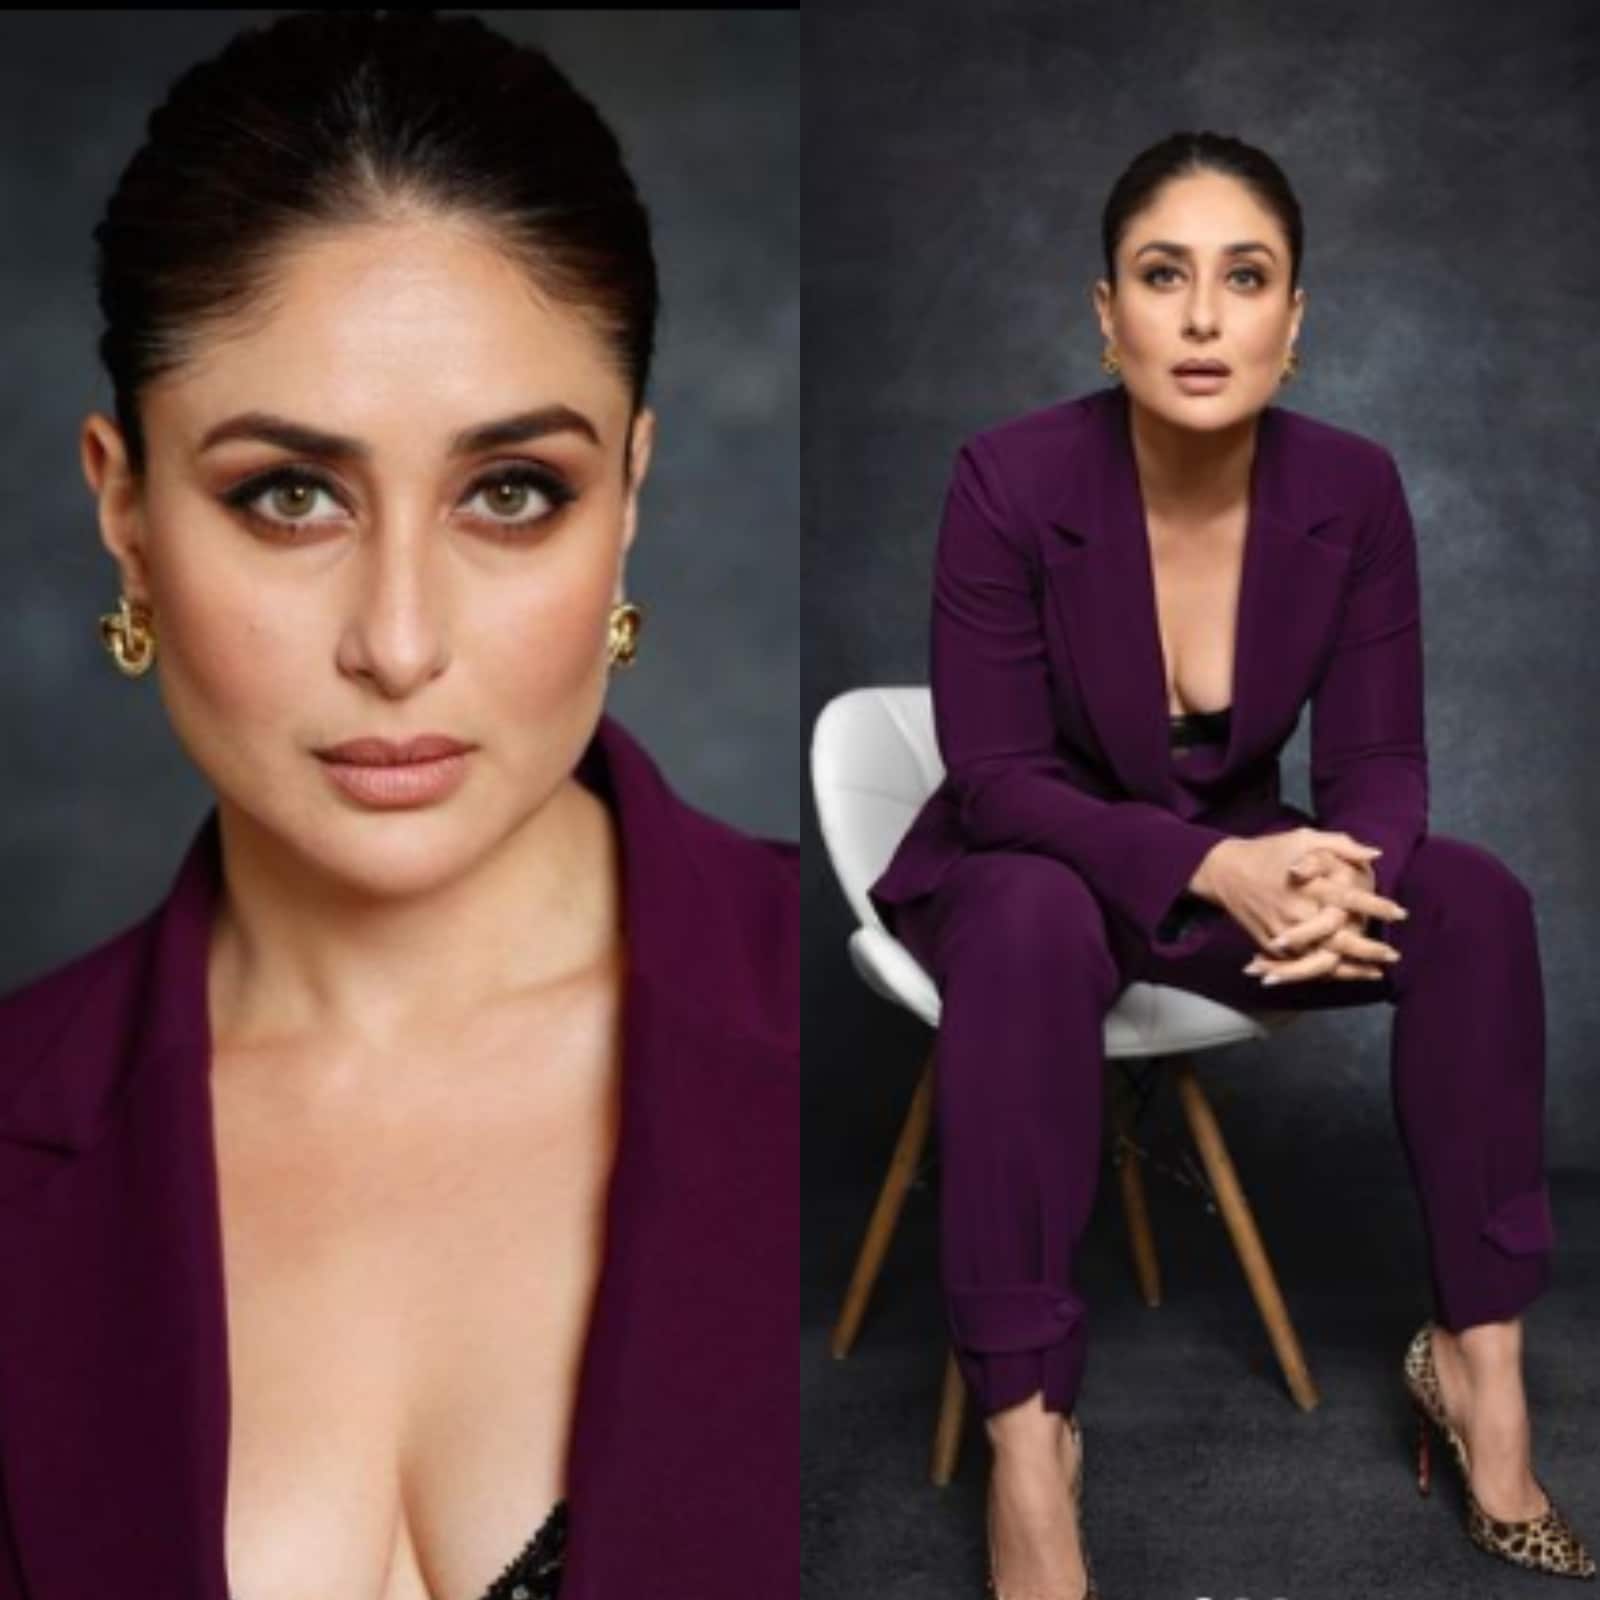 Xxx Vedio Of Karrenna Kapoor - Kareena Kapoor Khan is in Boss Lady Mood With Purple Pant-Suit, Fans Find  Her Stunning - News18